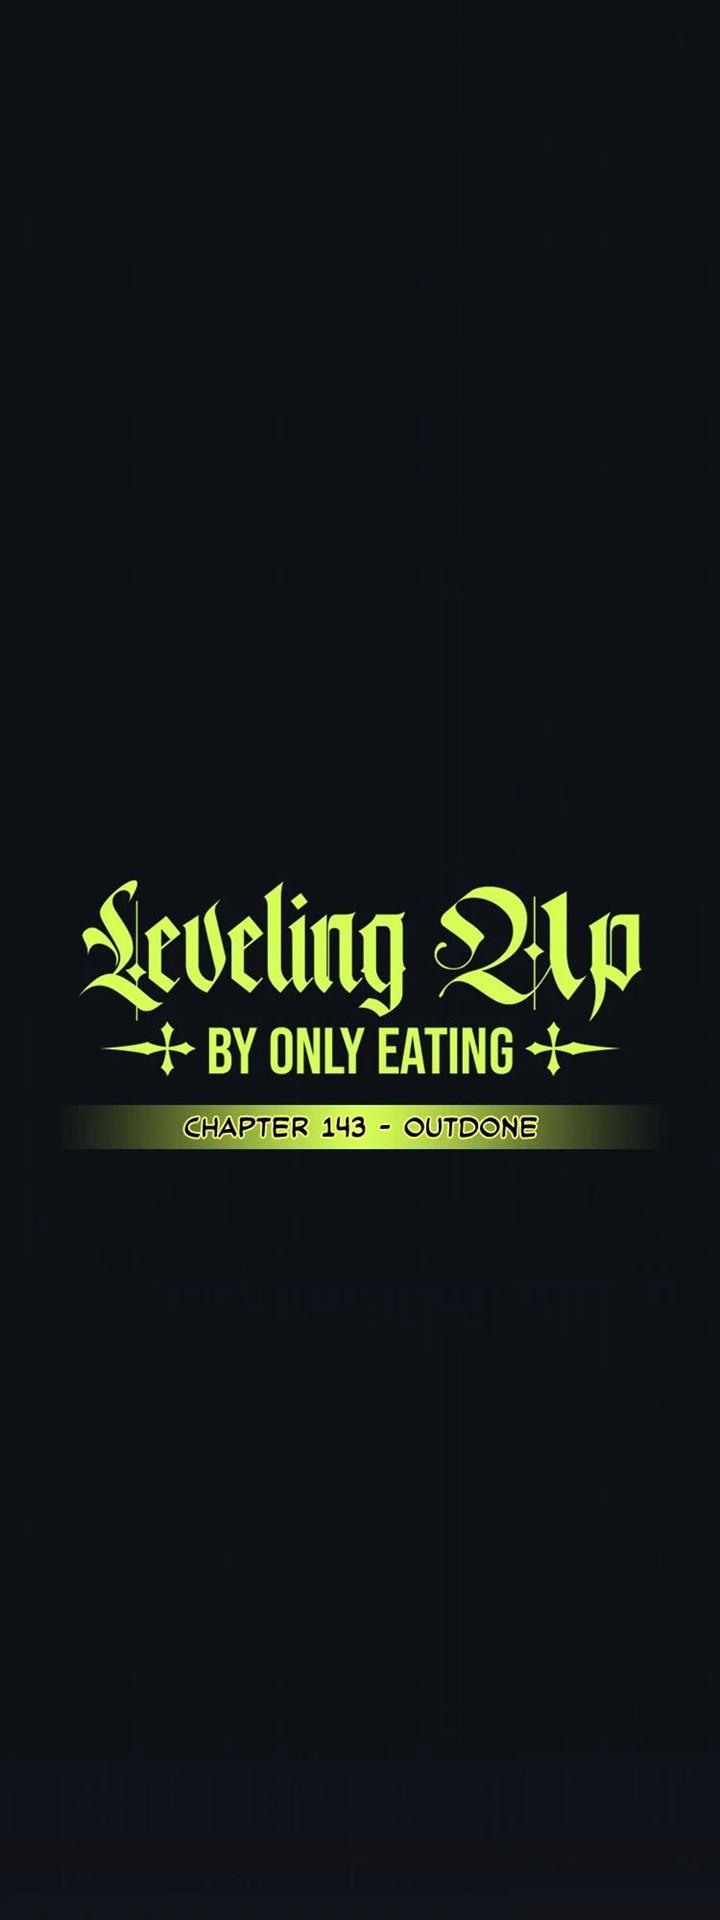 Leveling Up, by Only Eating! Chapter 143